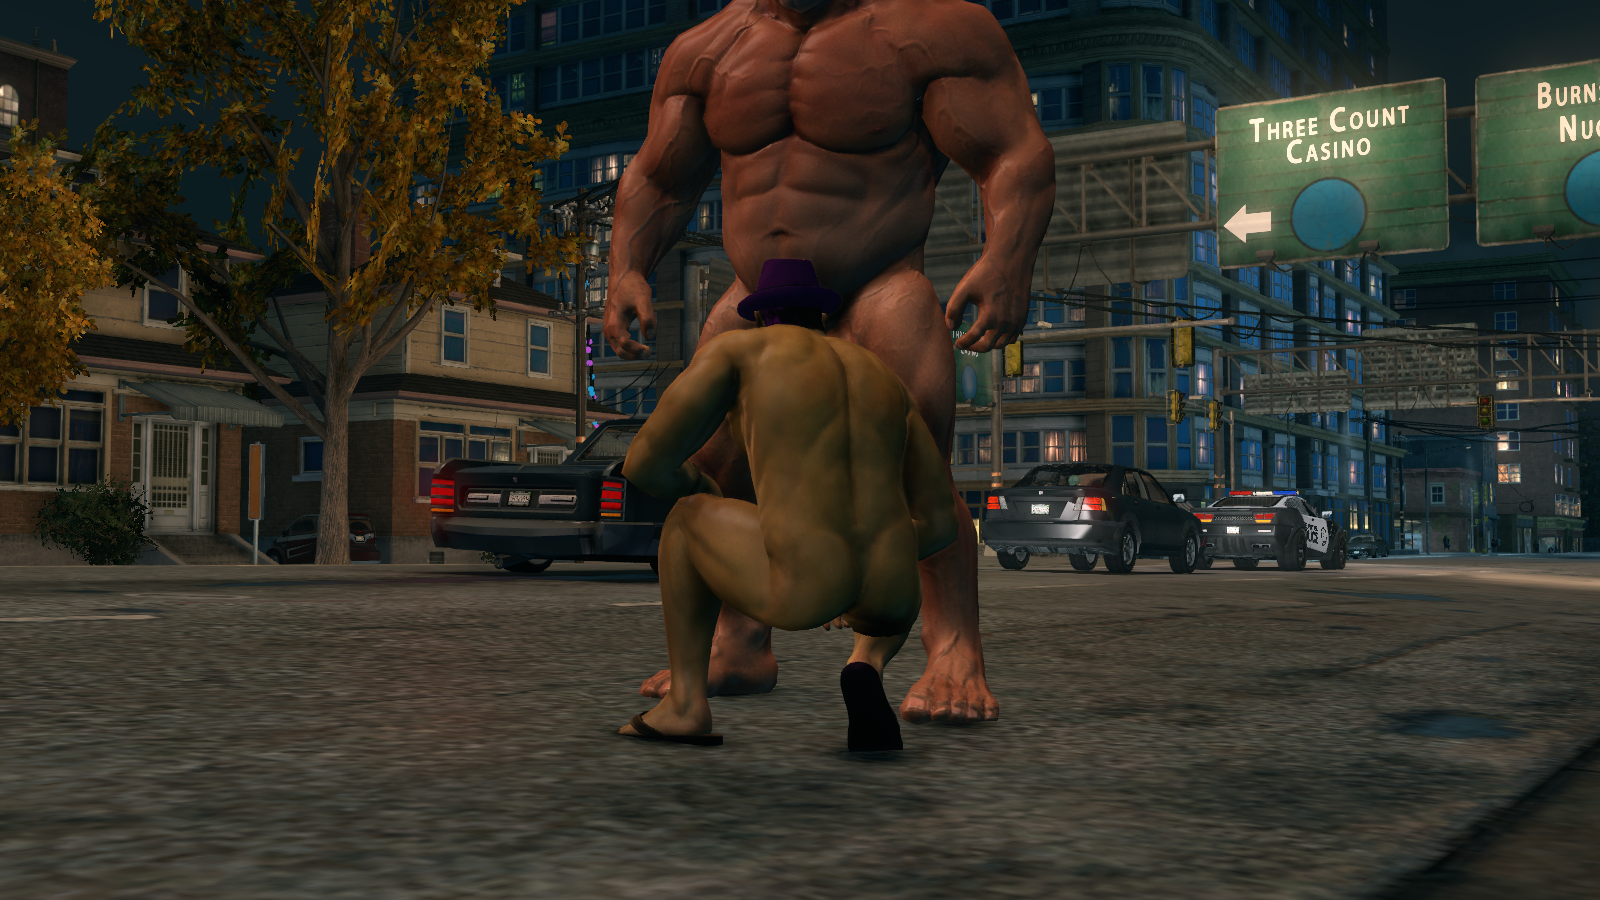 bonnie hafer recommends saints row nudity mod pic